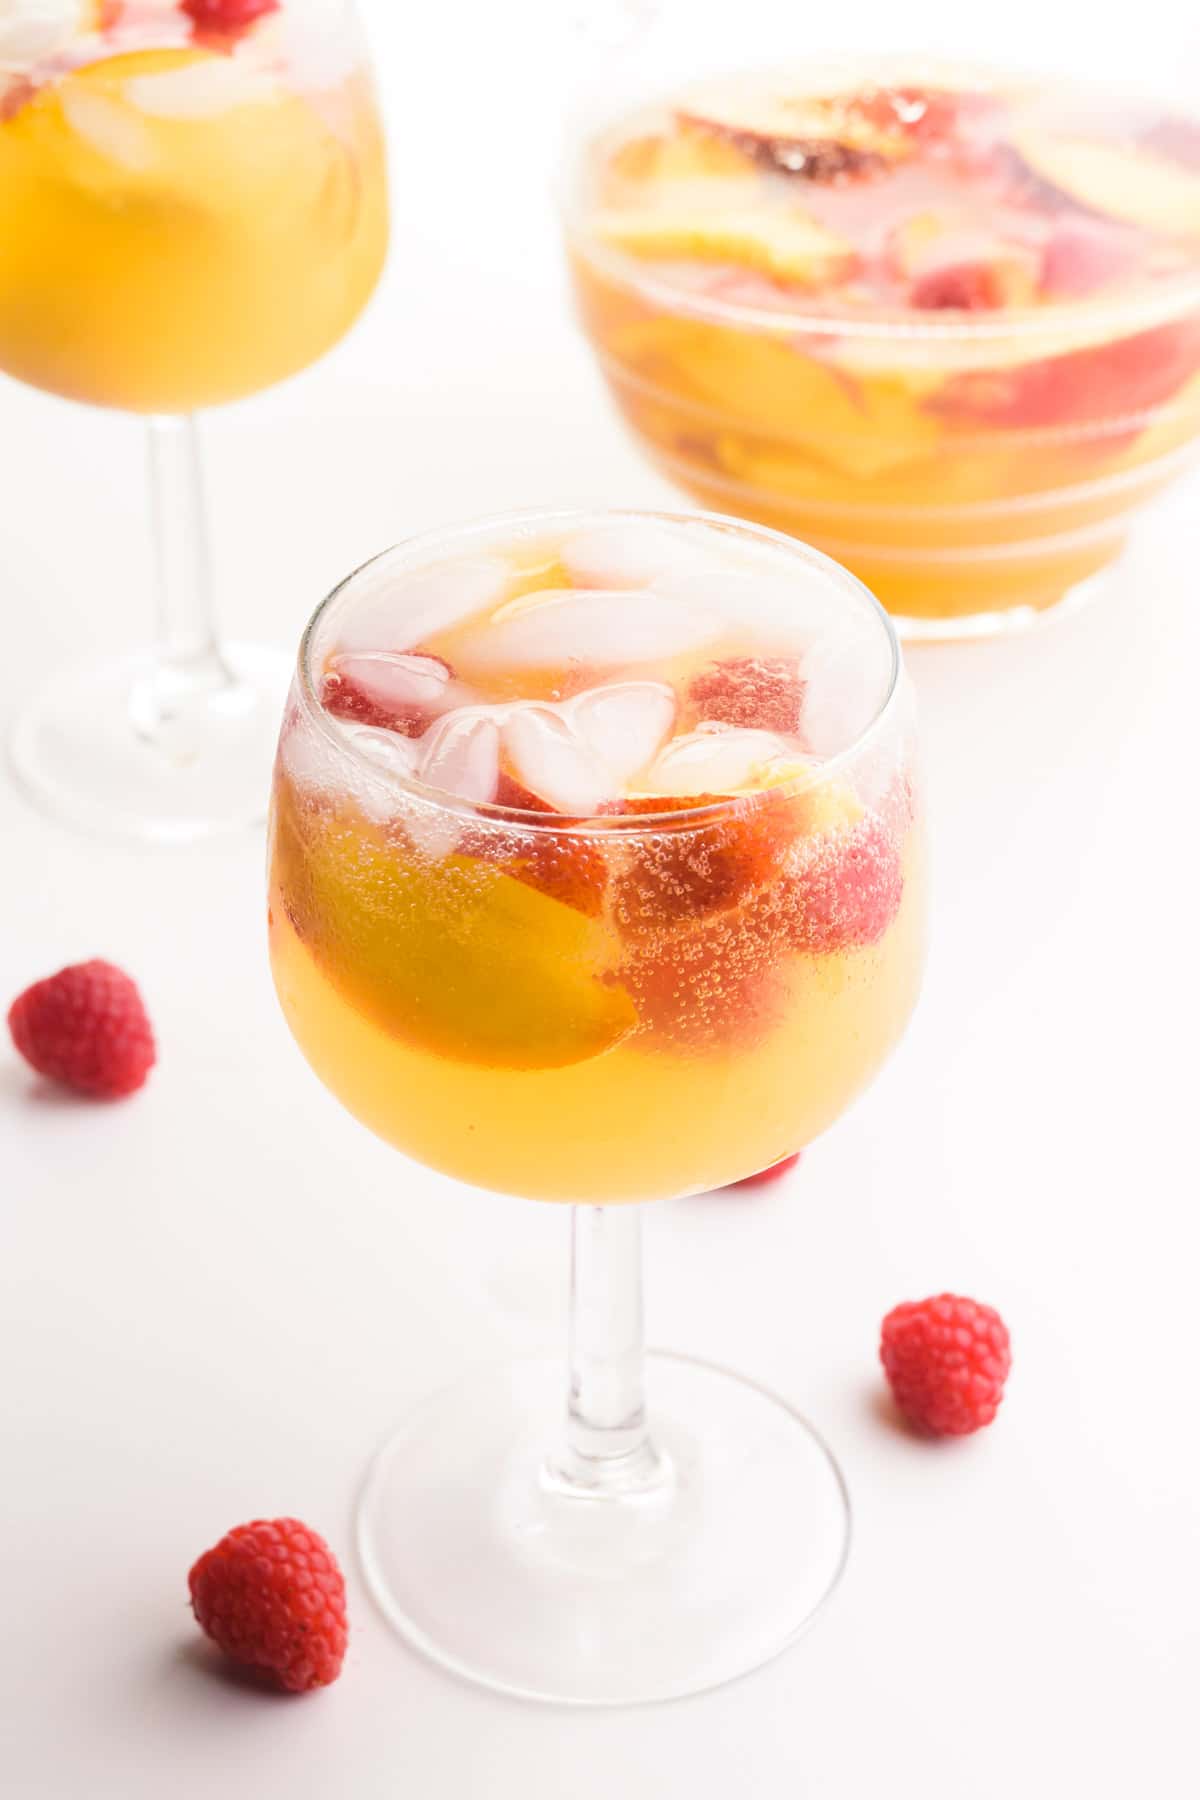 White peach sangria is in a wine glass along with peach slices and fresh raspberries. There are fresh raspberries, another glass of sangria and a pitcher of sangria in the background.